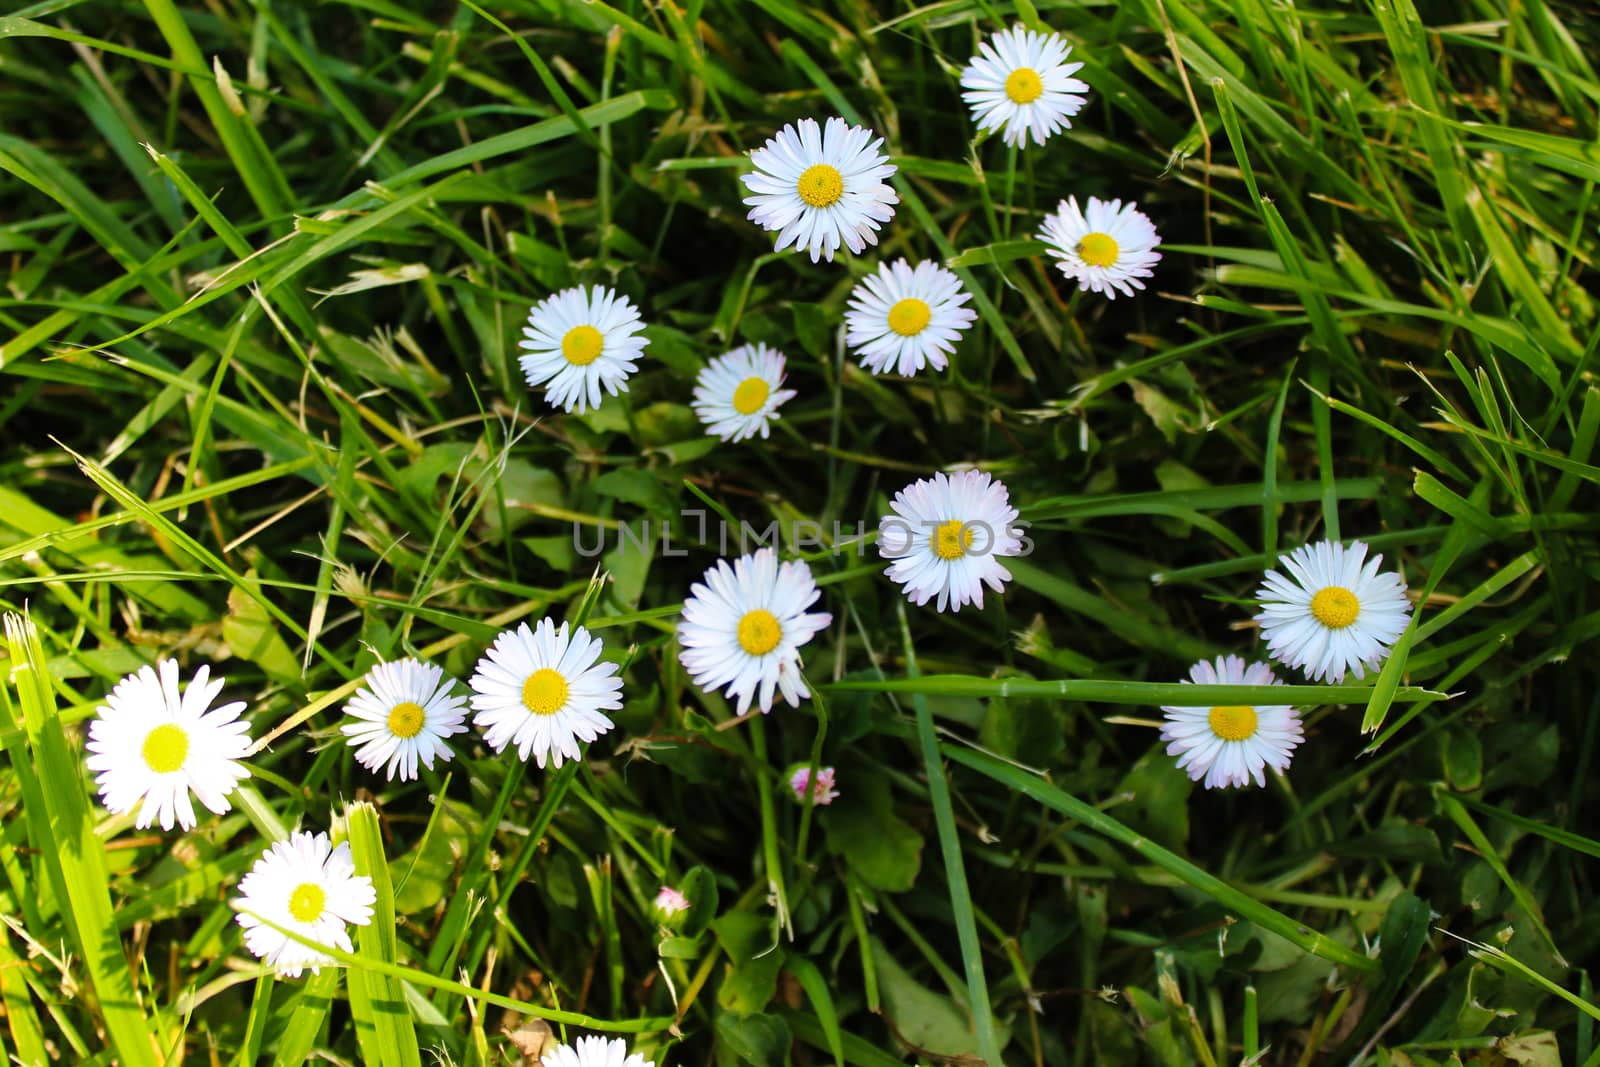 Bellis perennis, daisies in the grass. by mahirrov